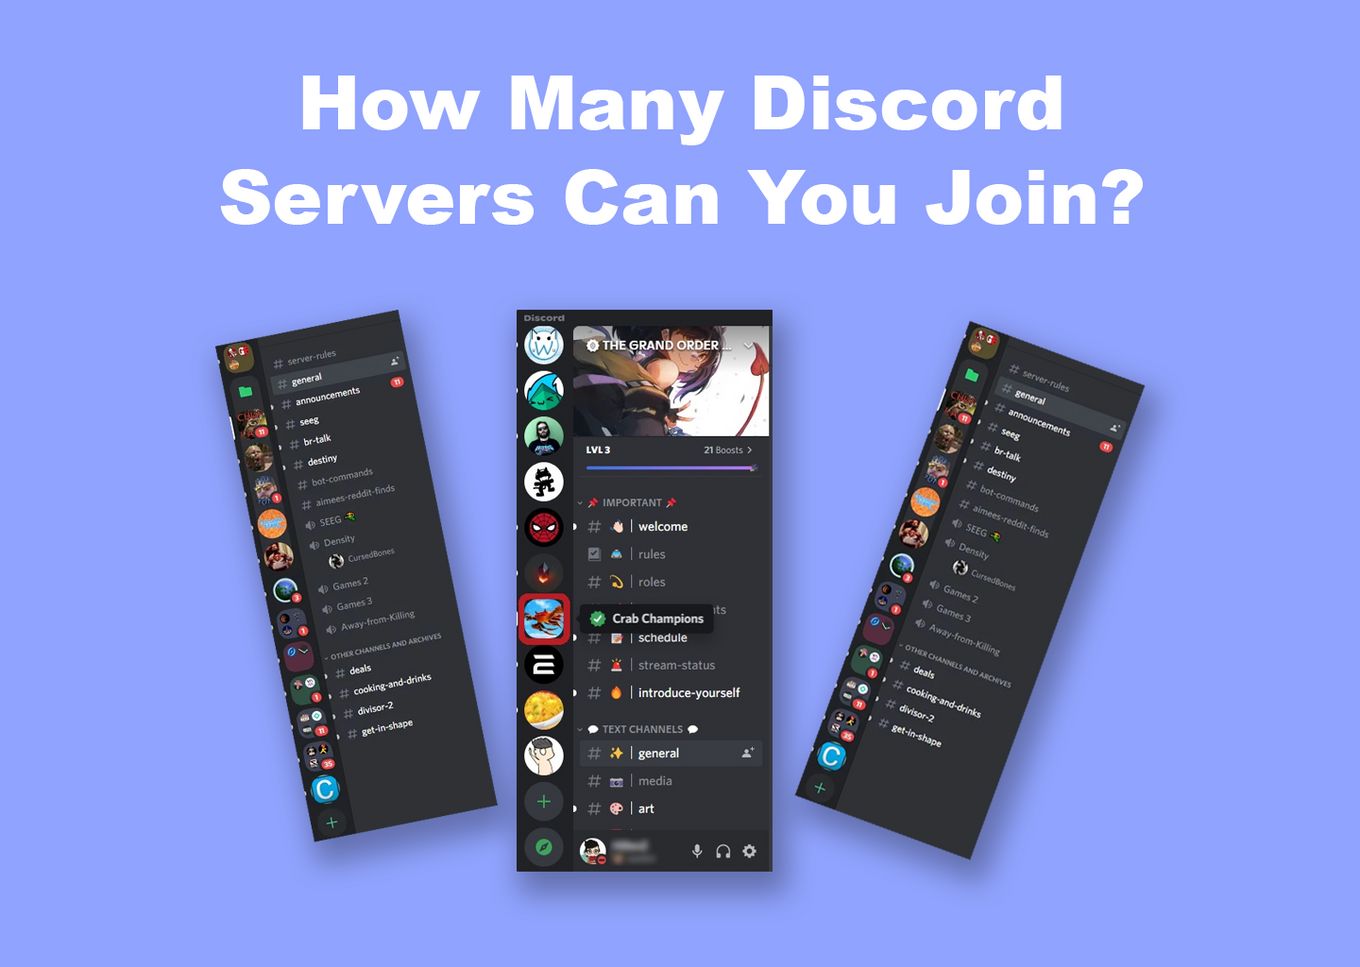 How Many Discord Servers Can You Join?